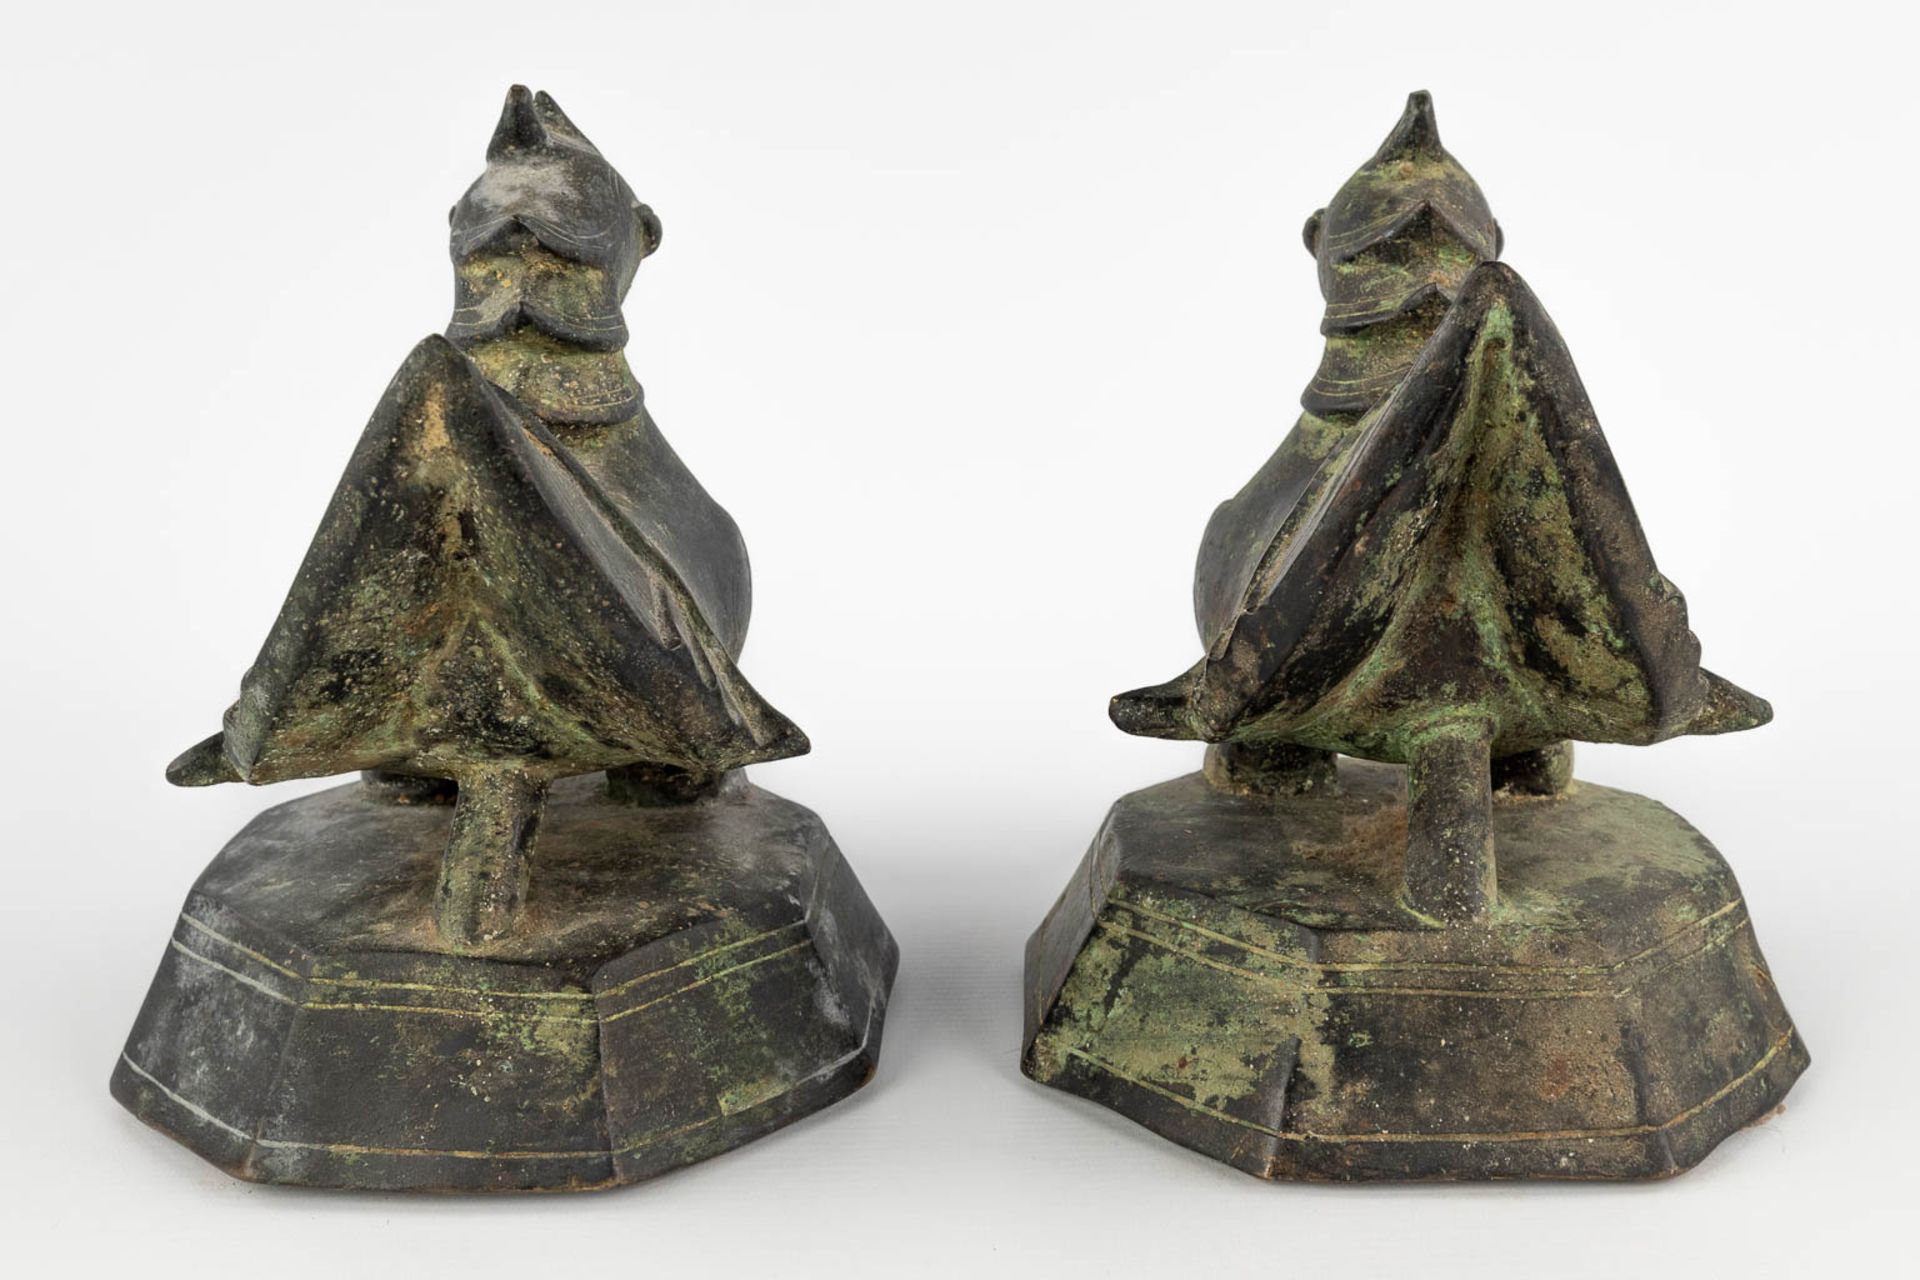 A pair of Oriental figurines, decorated with mythological figurines. Bronze. (D:17 x W:18 x H:22 cm) - Image 5 of 10